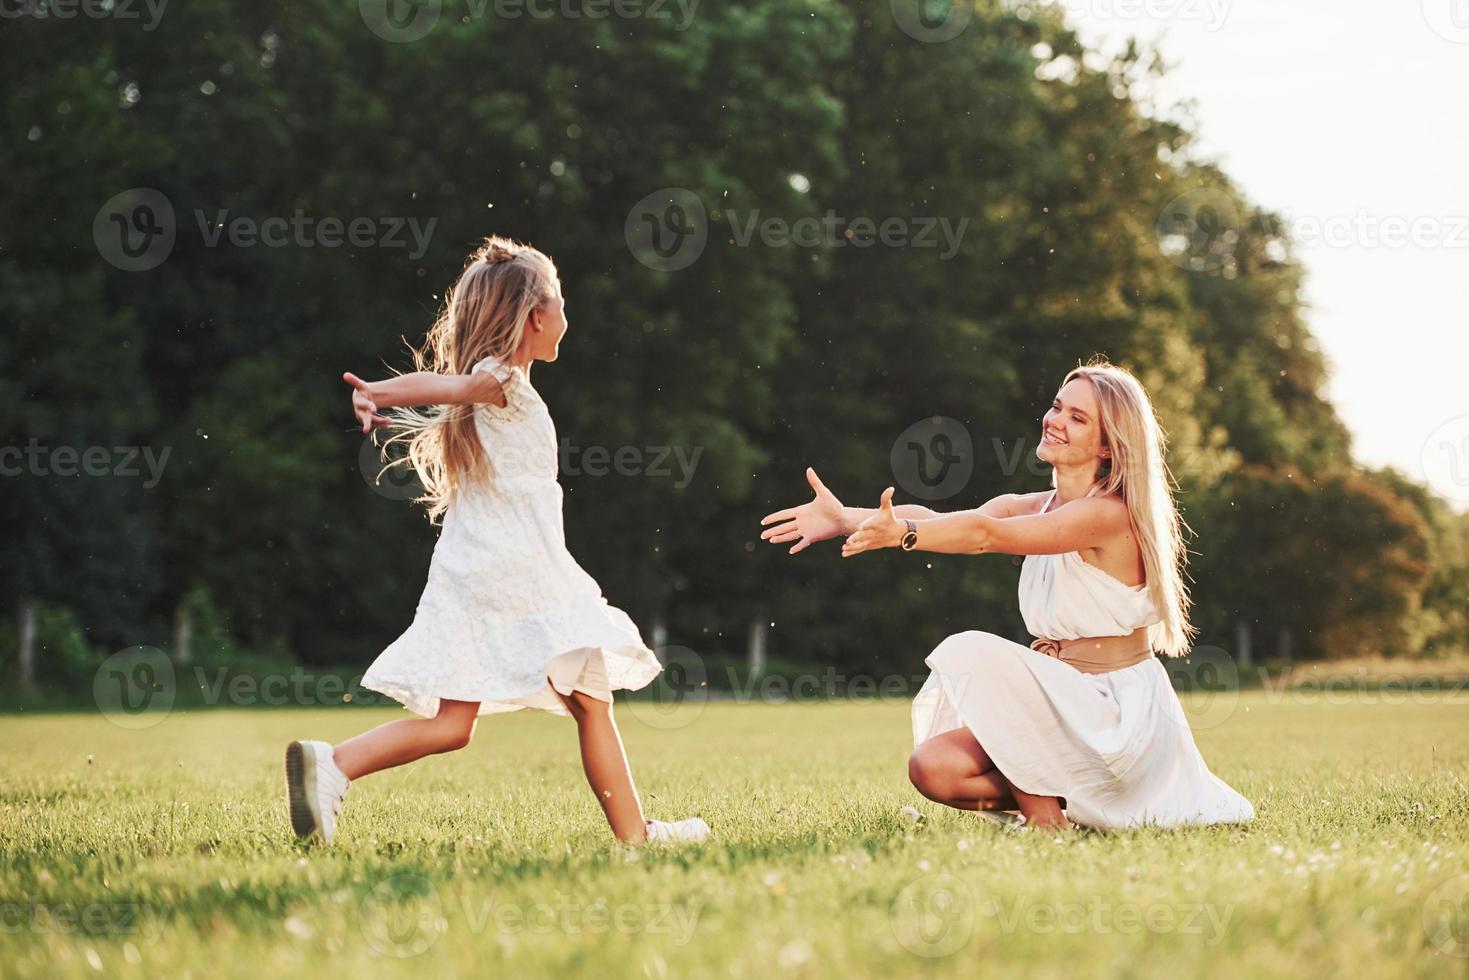 Finally we met. Mother and daughter enjoying weekend together by walking outdoors in the field. Beautiful nature photo